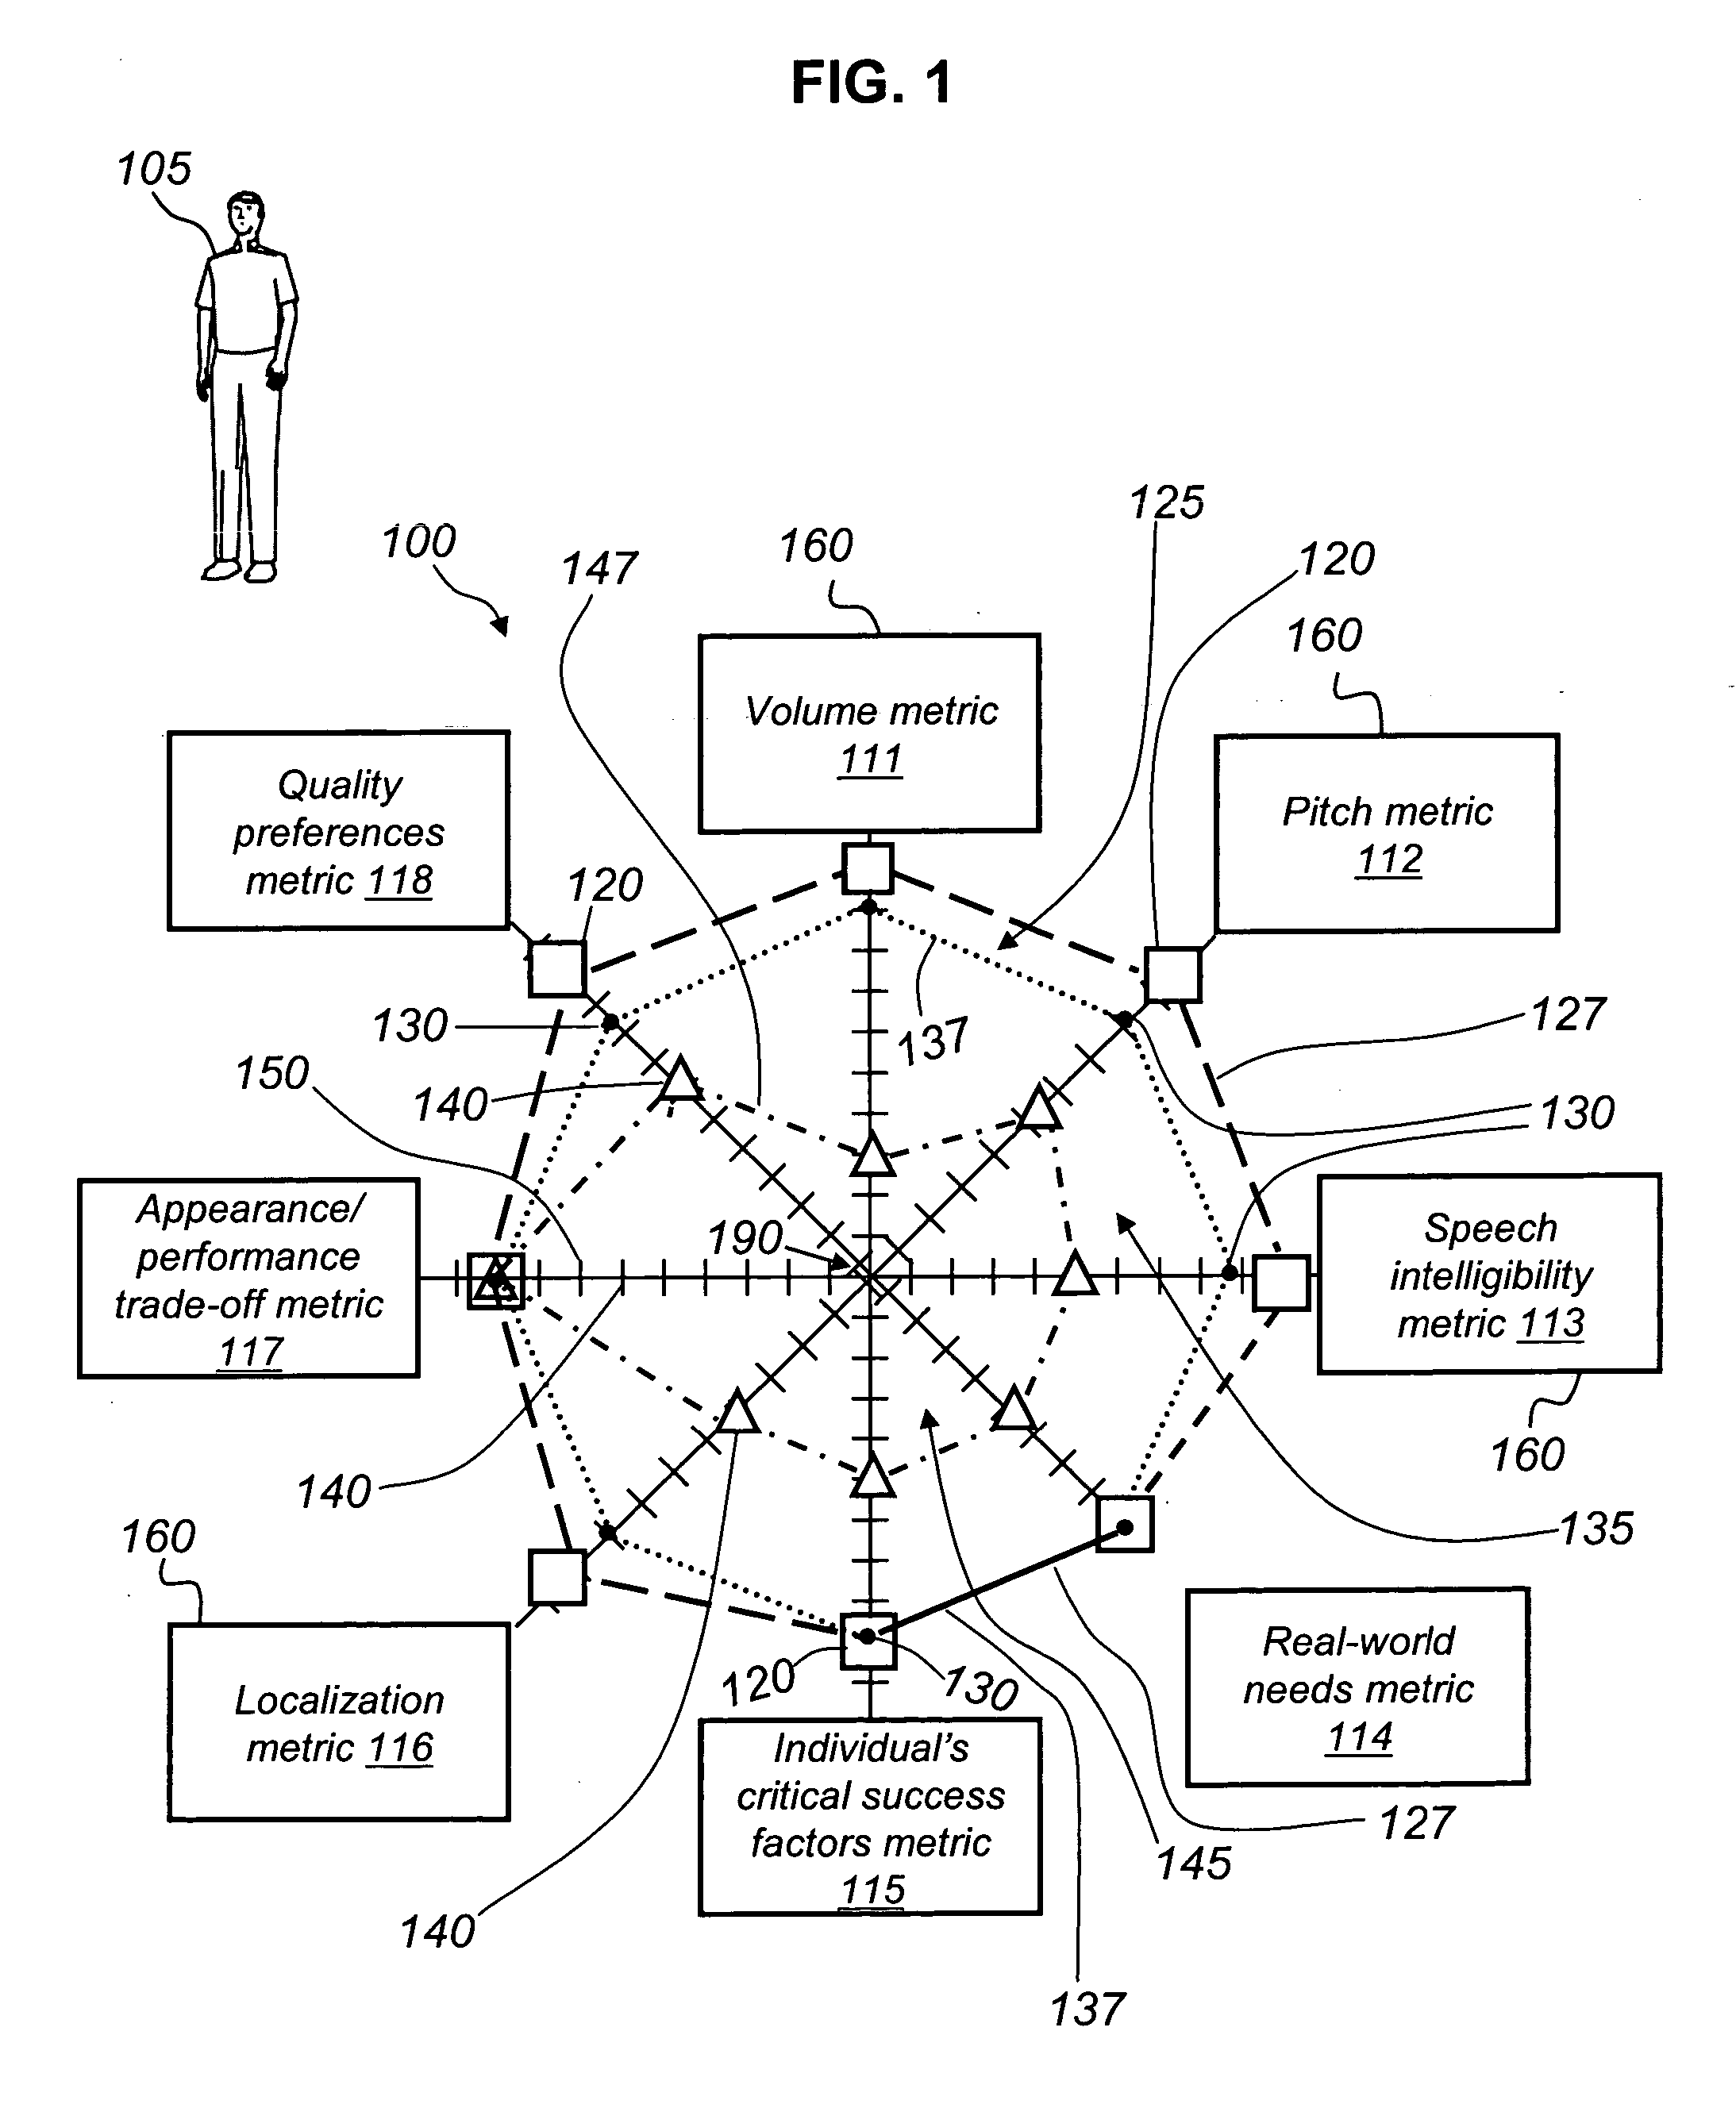 Method and system for rehabilitating a medical condition across multiple dimensions